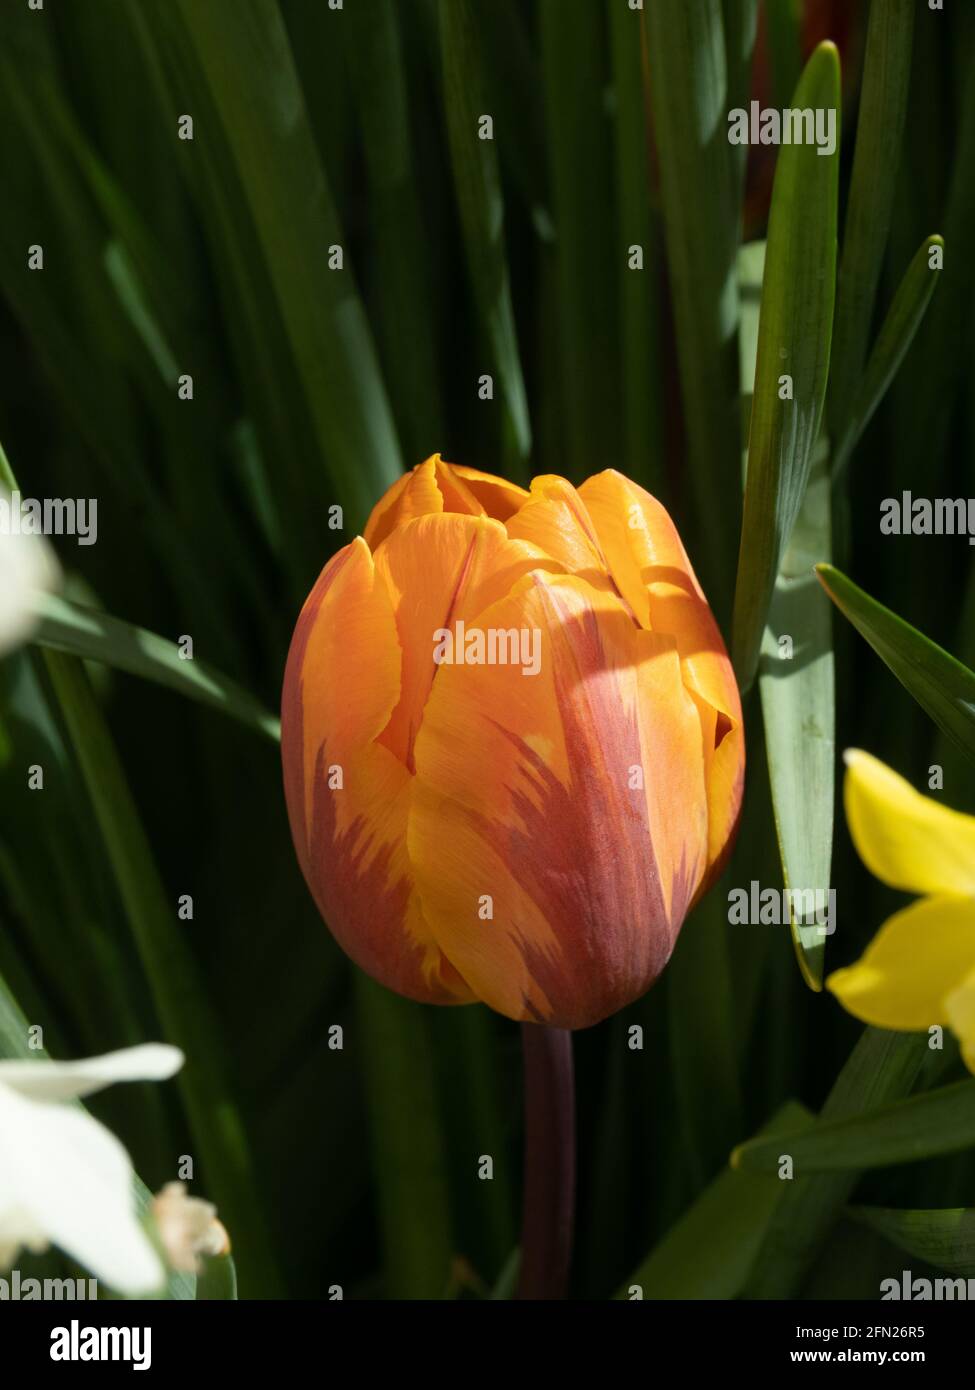 Aclose up of a single flower the orange and red parrot tulip Princess Irene Stock Photo